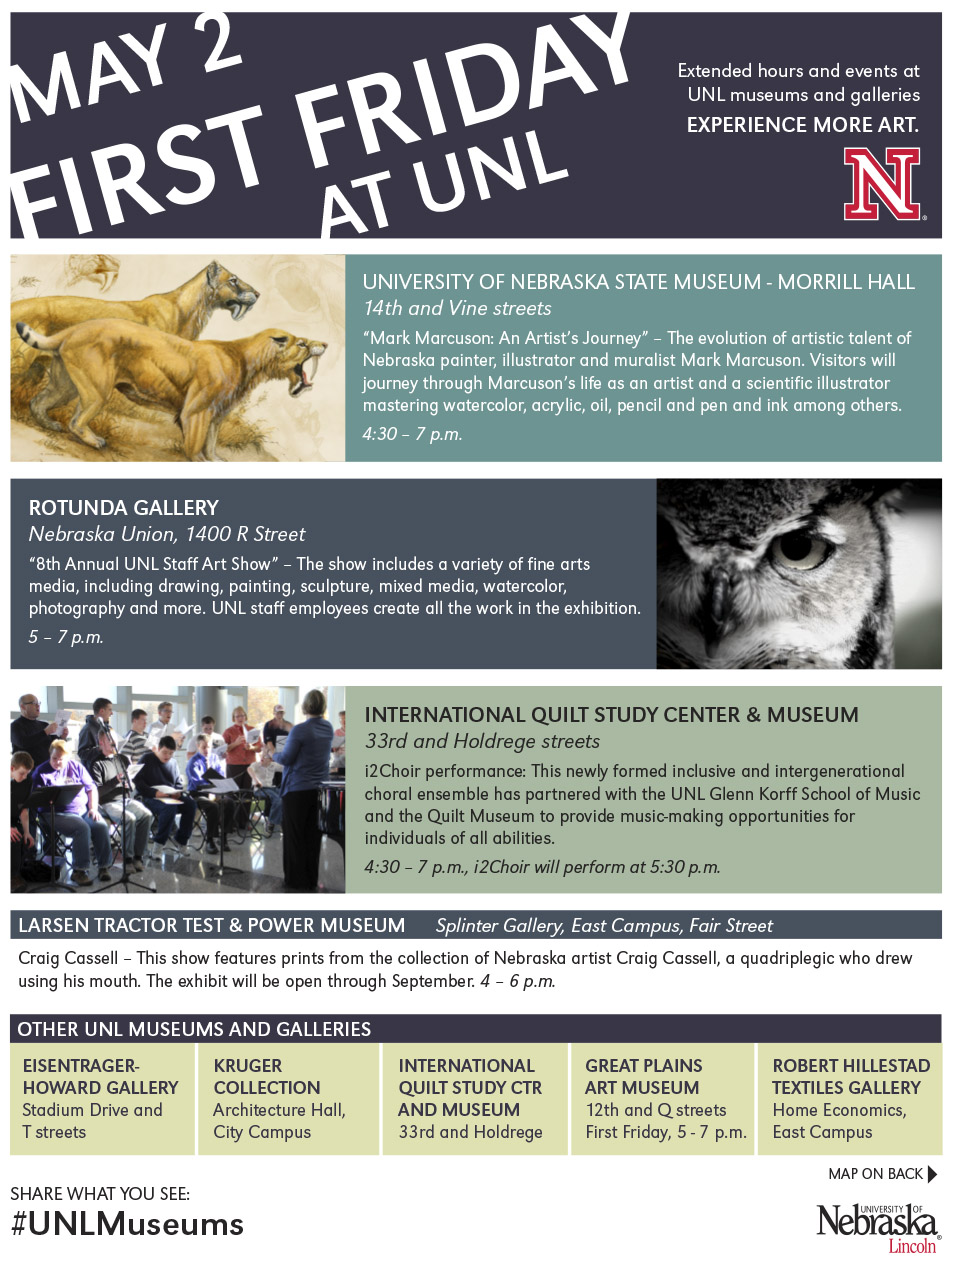 Museums across UNL's campus will offer special entertainment for First Friday.